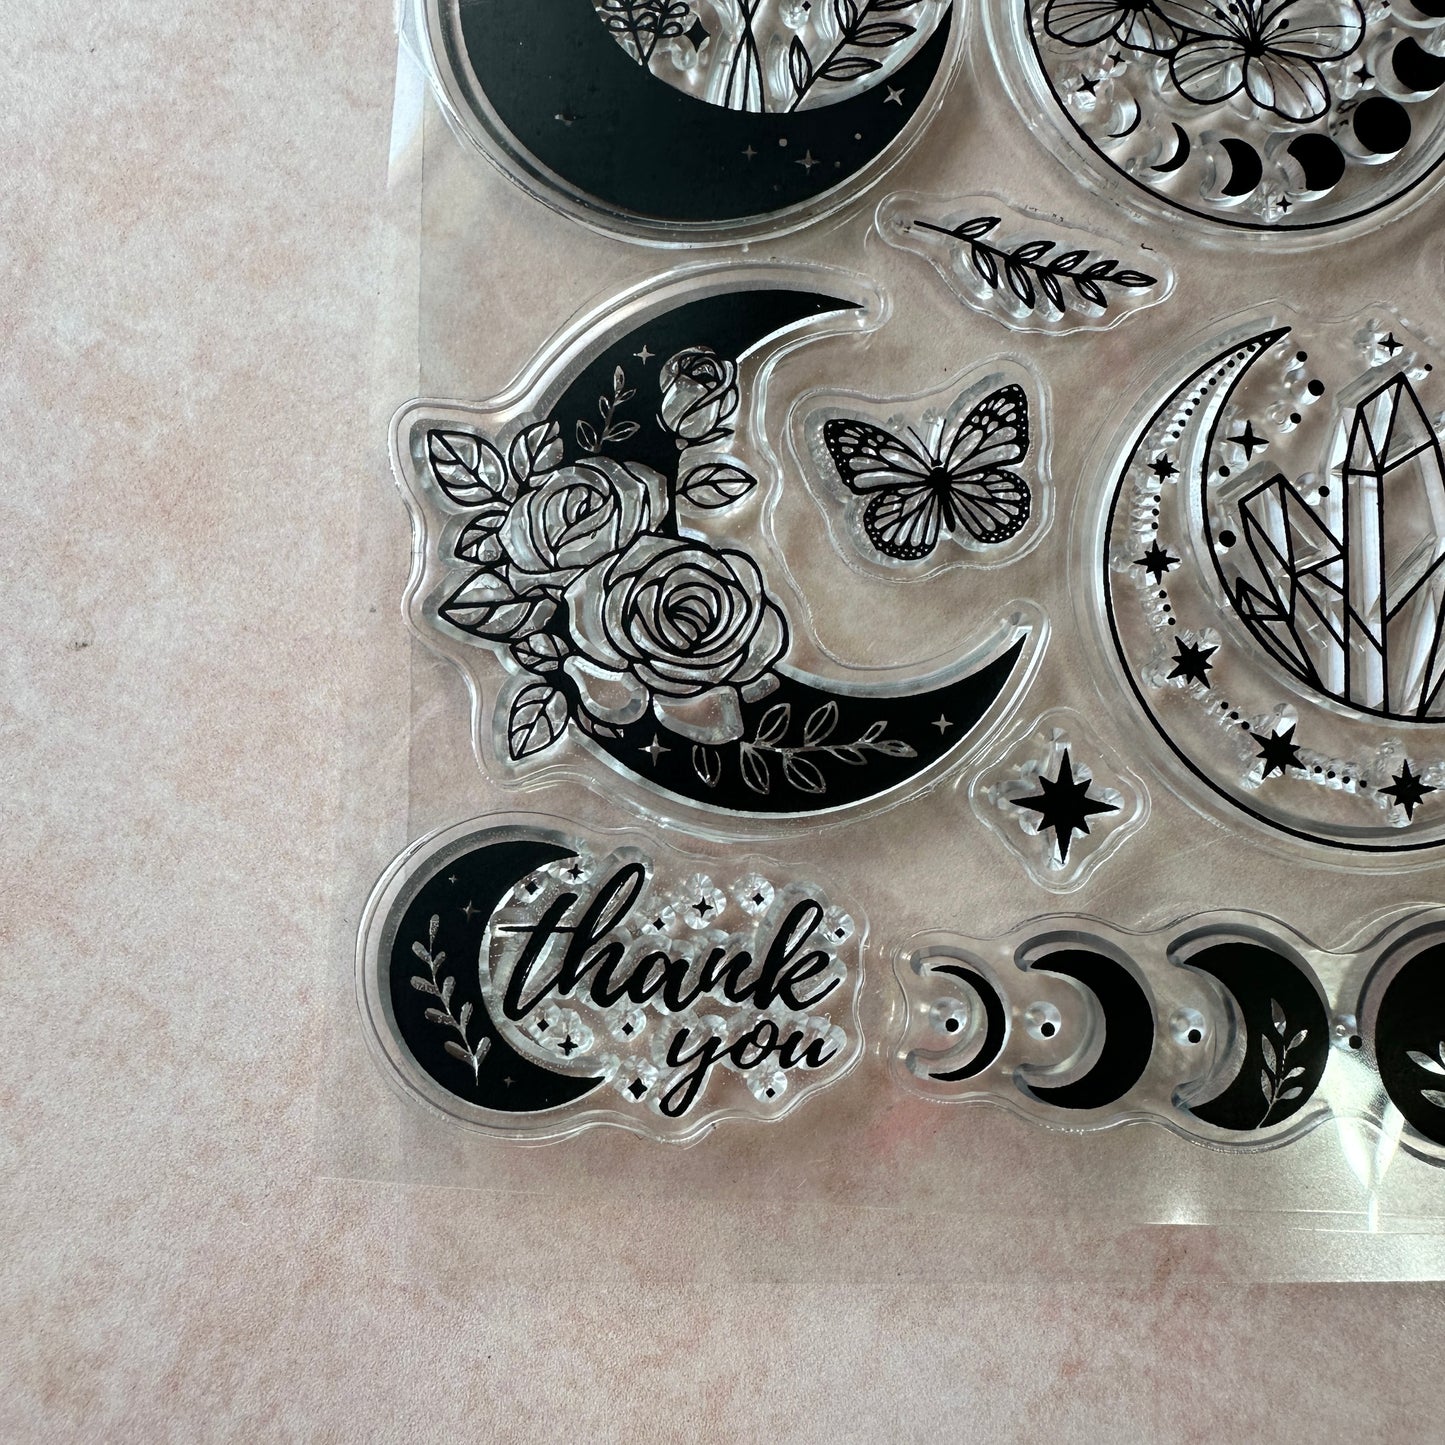 Celestial Moons clear rubber stamp polymer clay scrapbook mixed media gelli printing